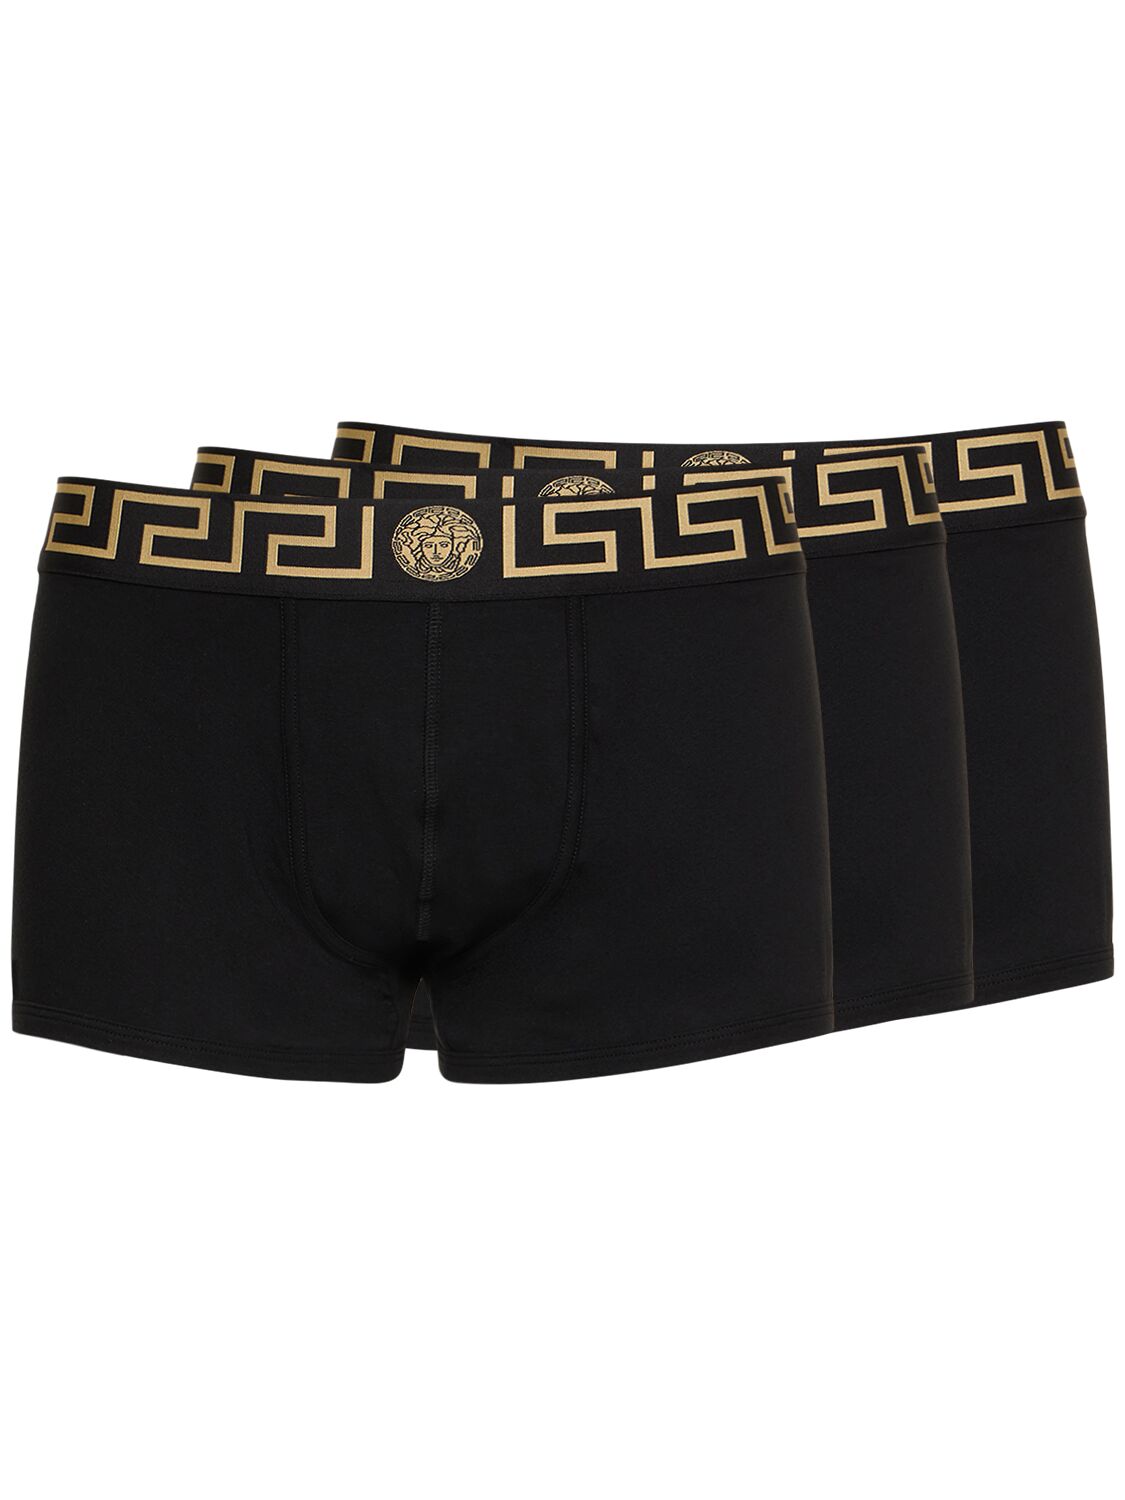 Versace Pack Of 3 Greca Stretch Cotton Boxers In Black,gold